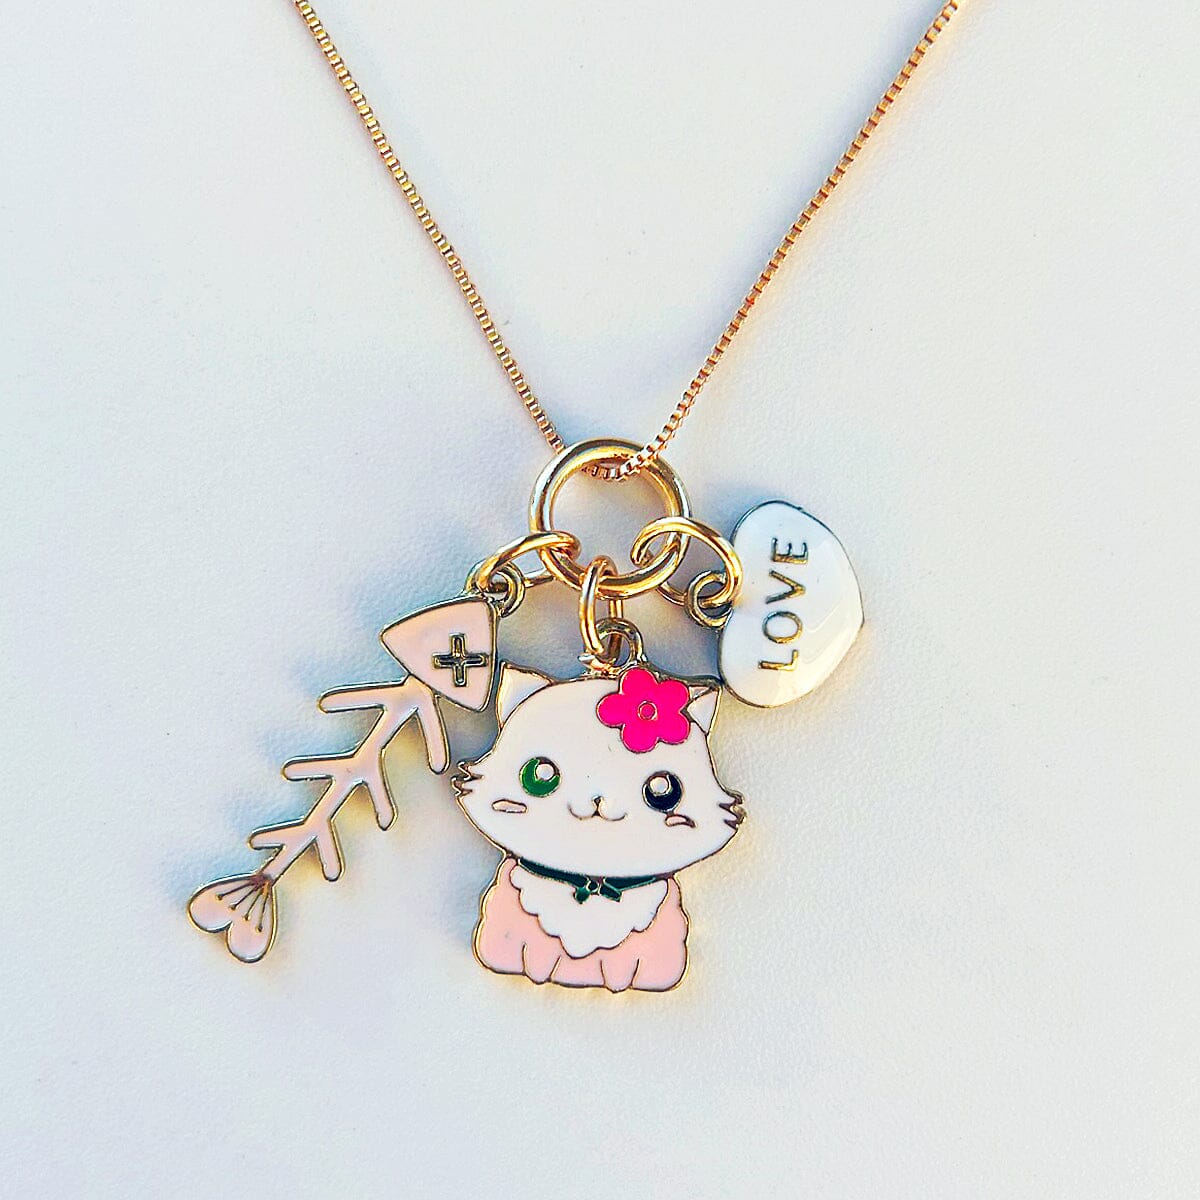 Cat, Heart & Fish Charm Necklace